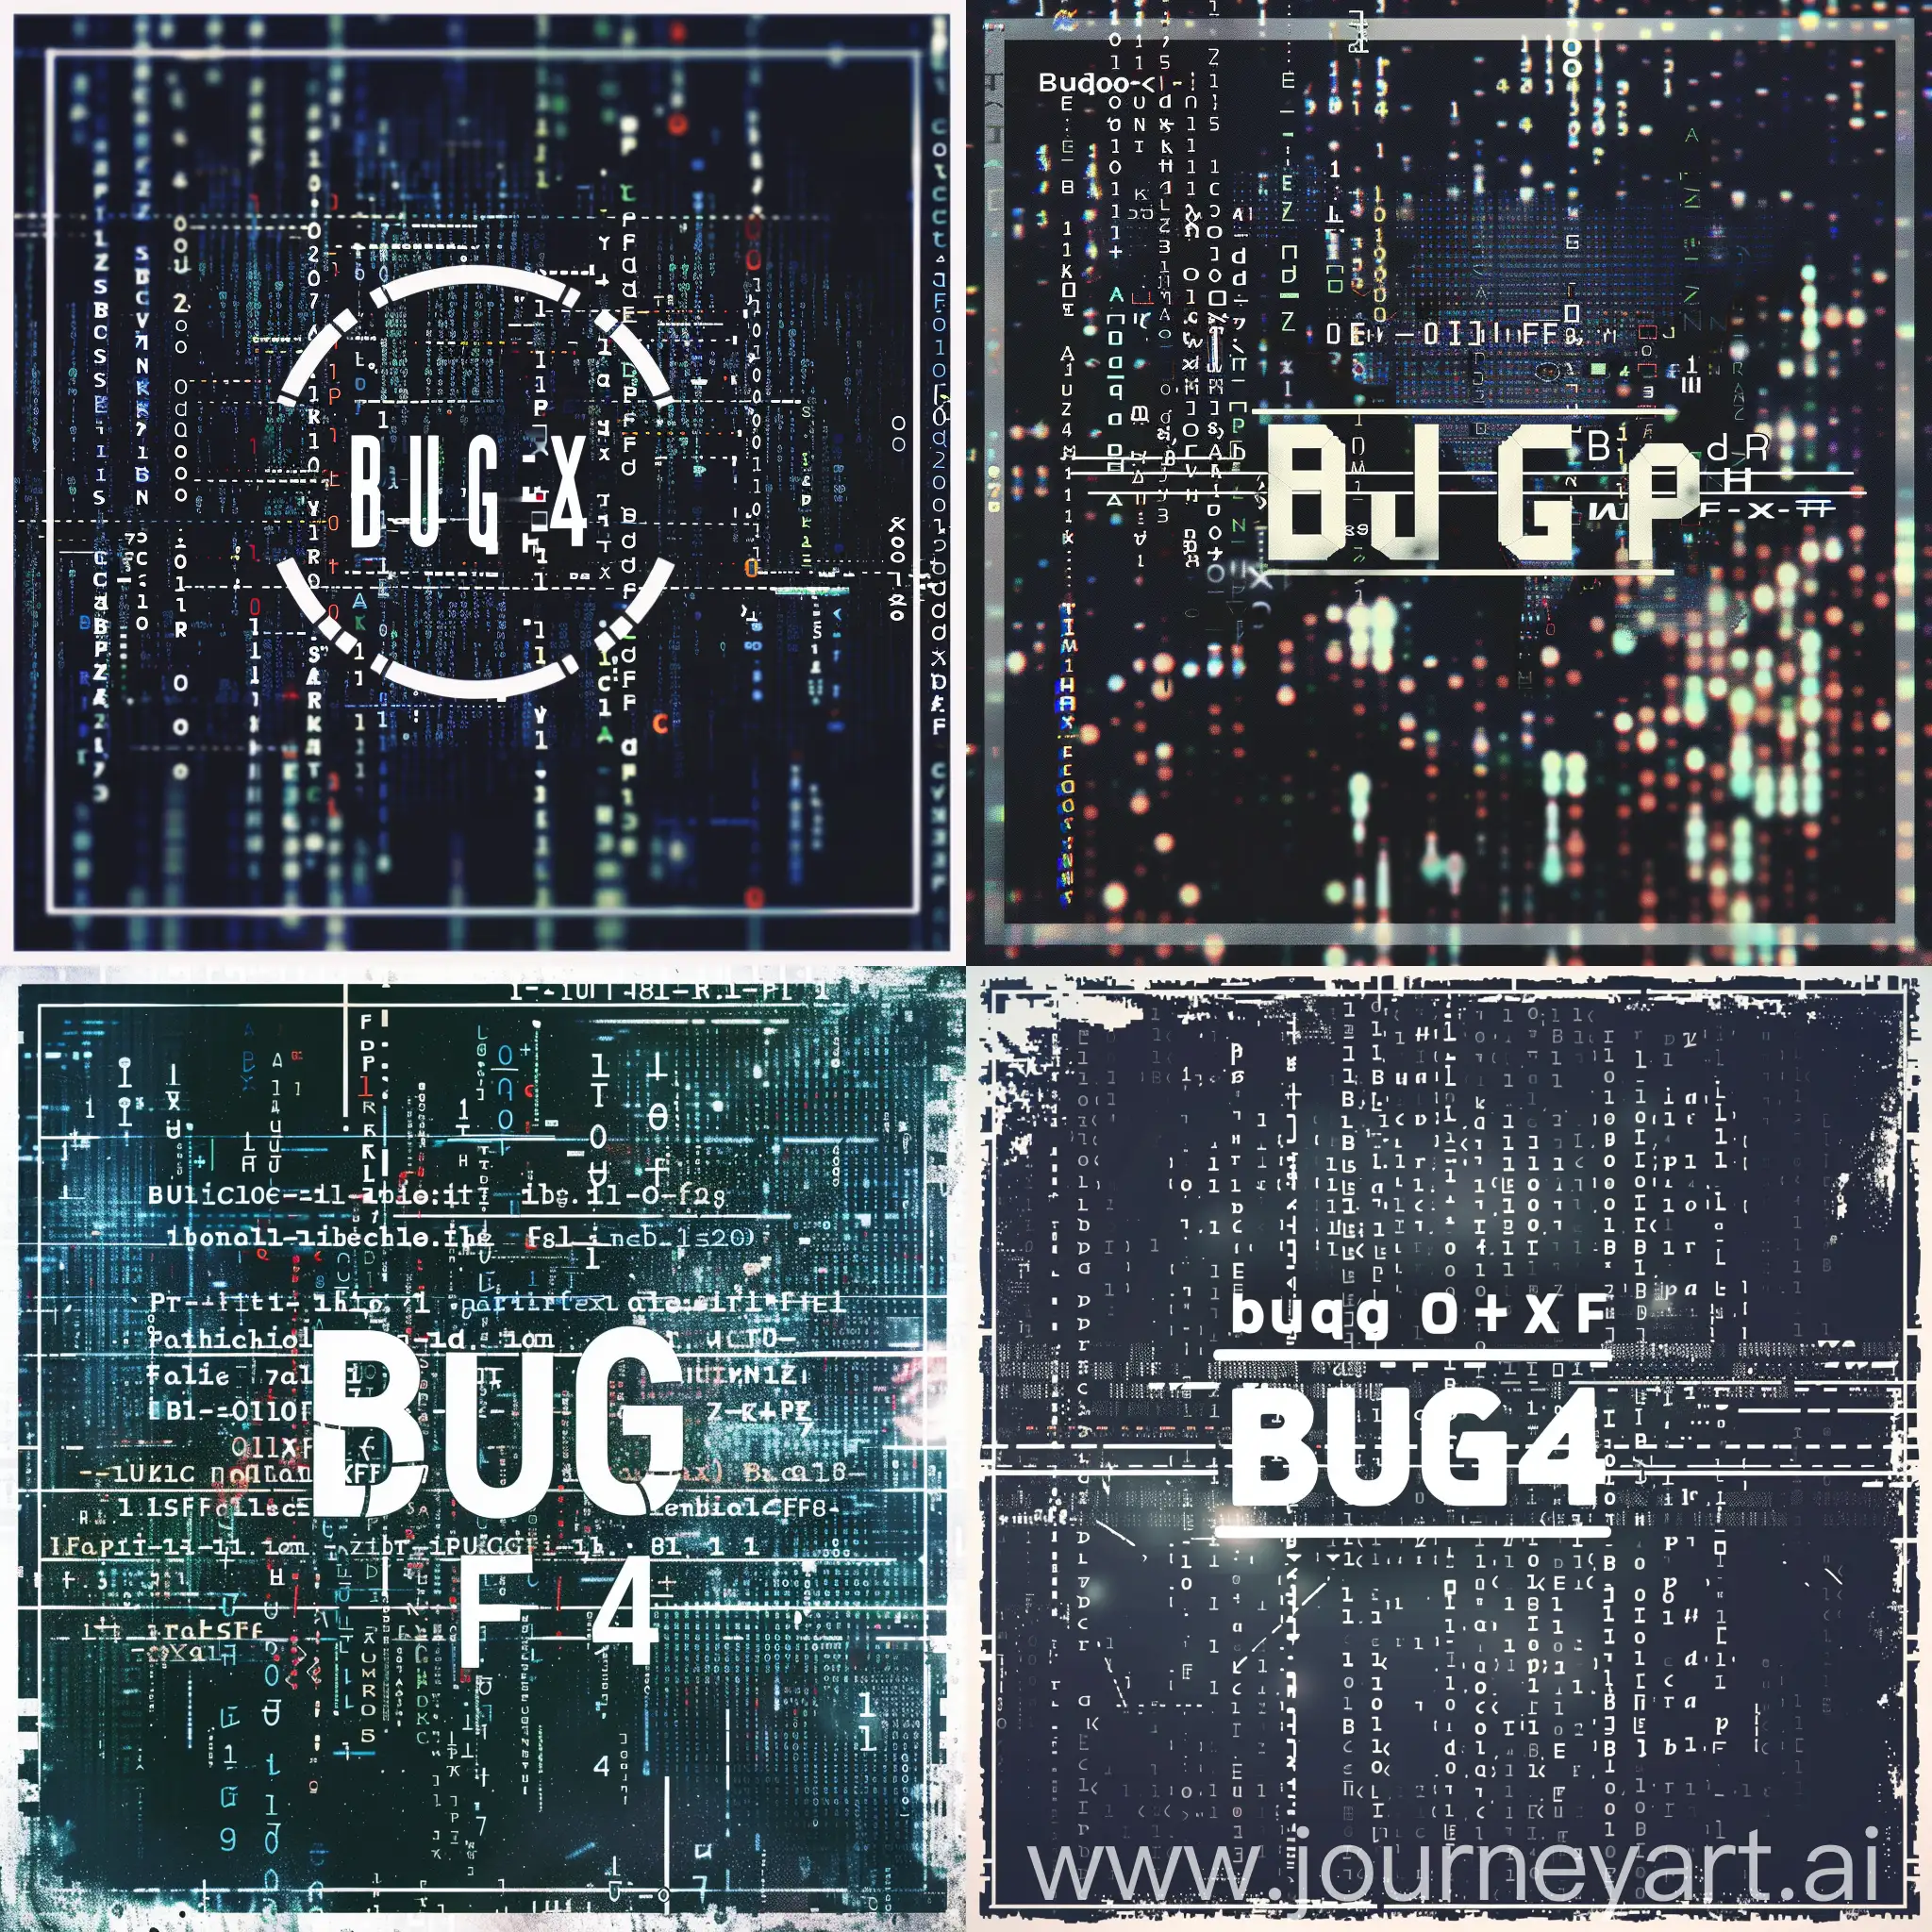 please hacking or cybersecurity themed logo image with a white border around the edges and a logo in the middle containing the specific exact text "Bug0xF4".  Also add some computer code or programming code in the background.